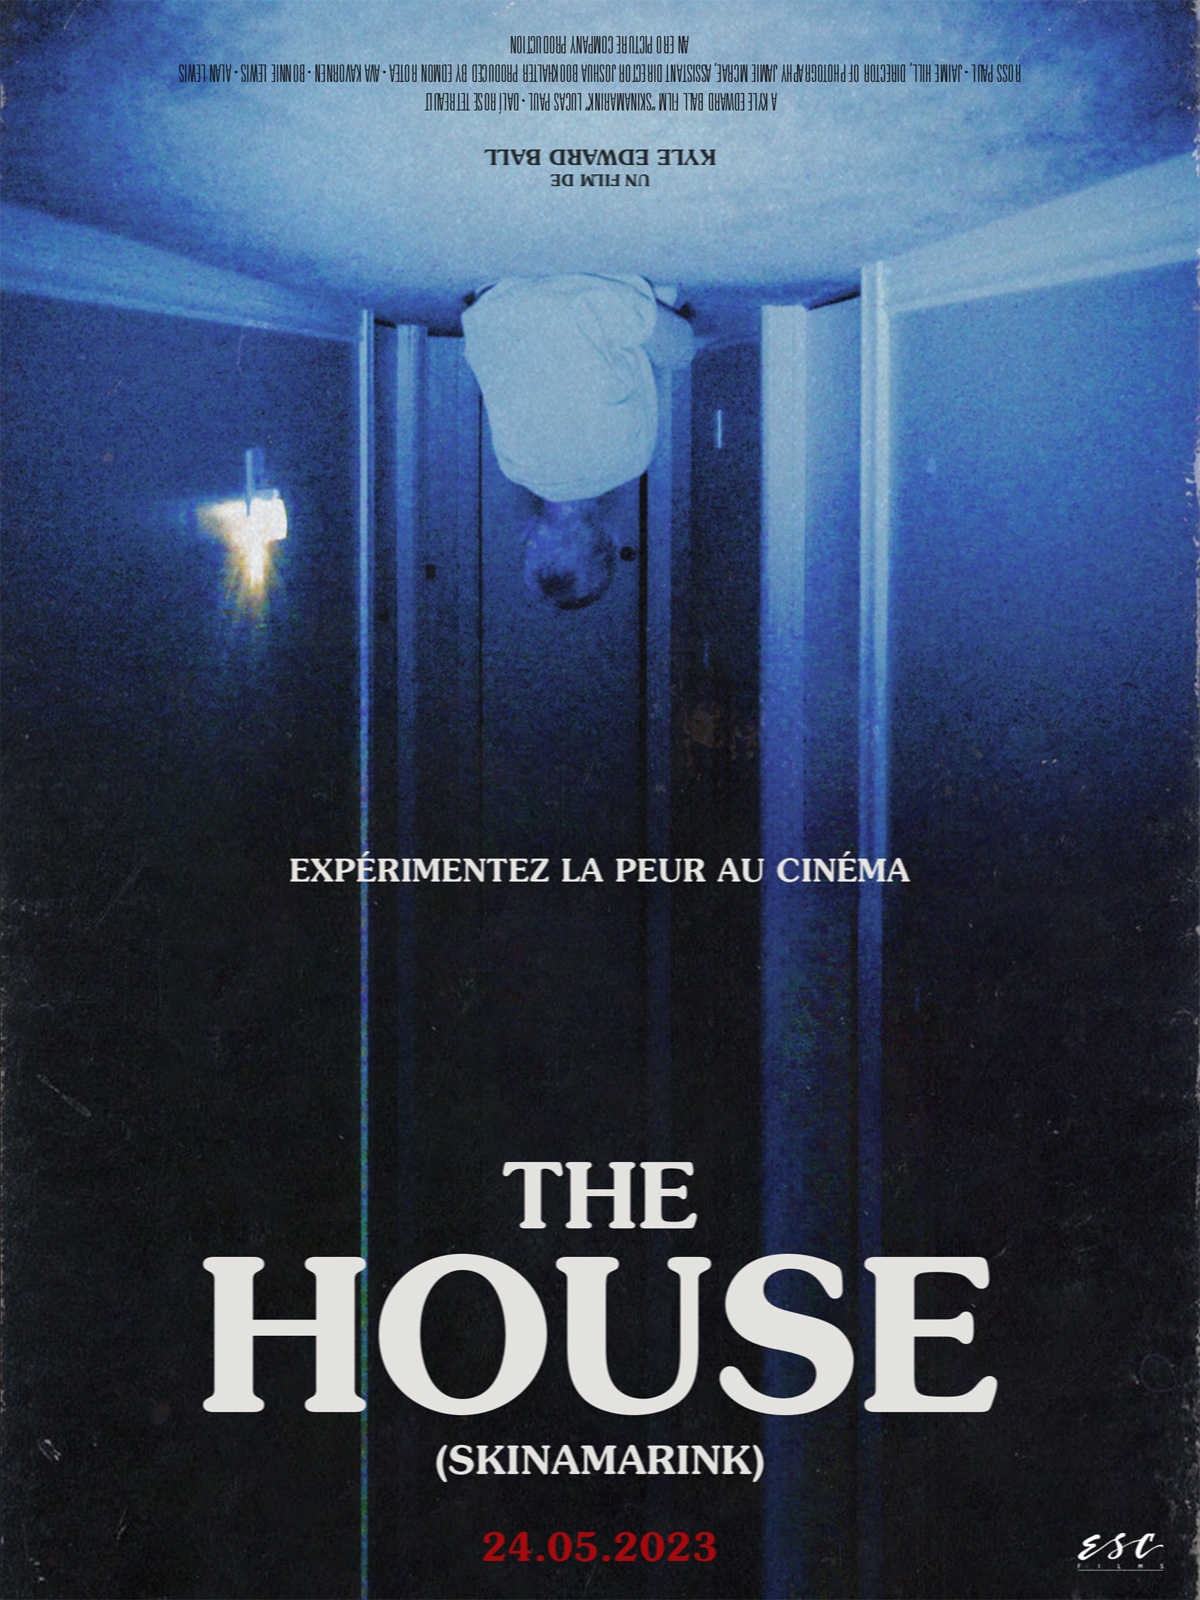 The House streaming vf gratuit